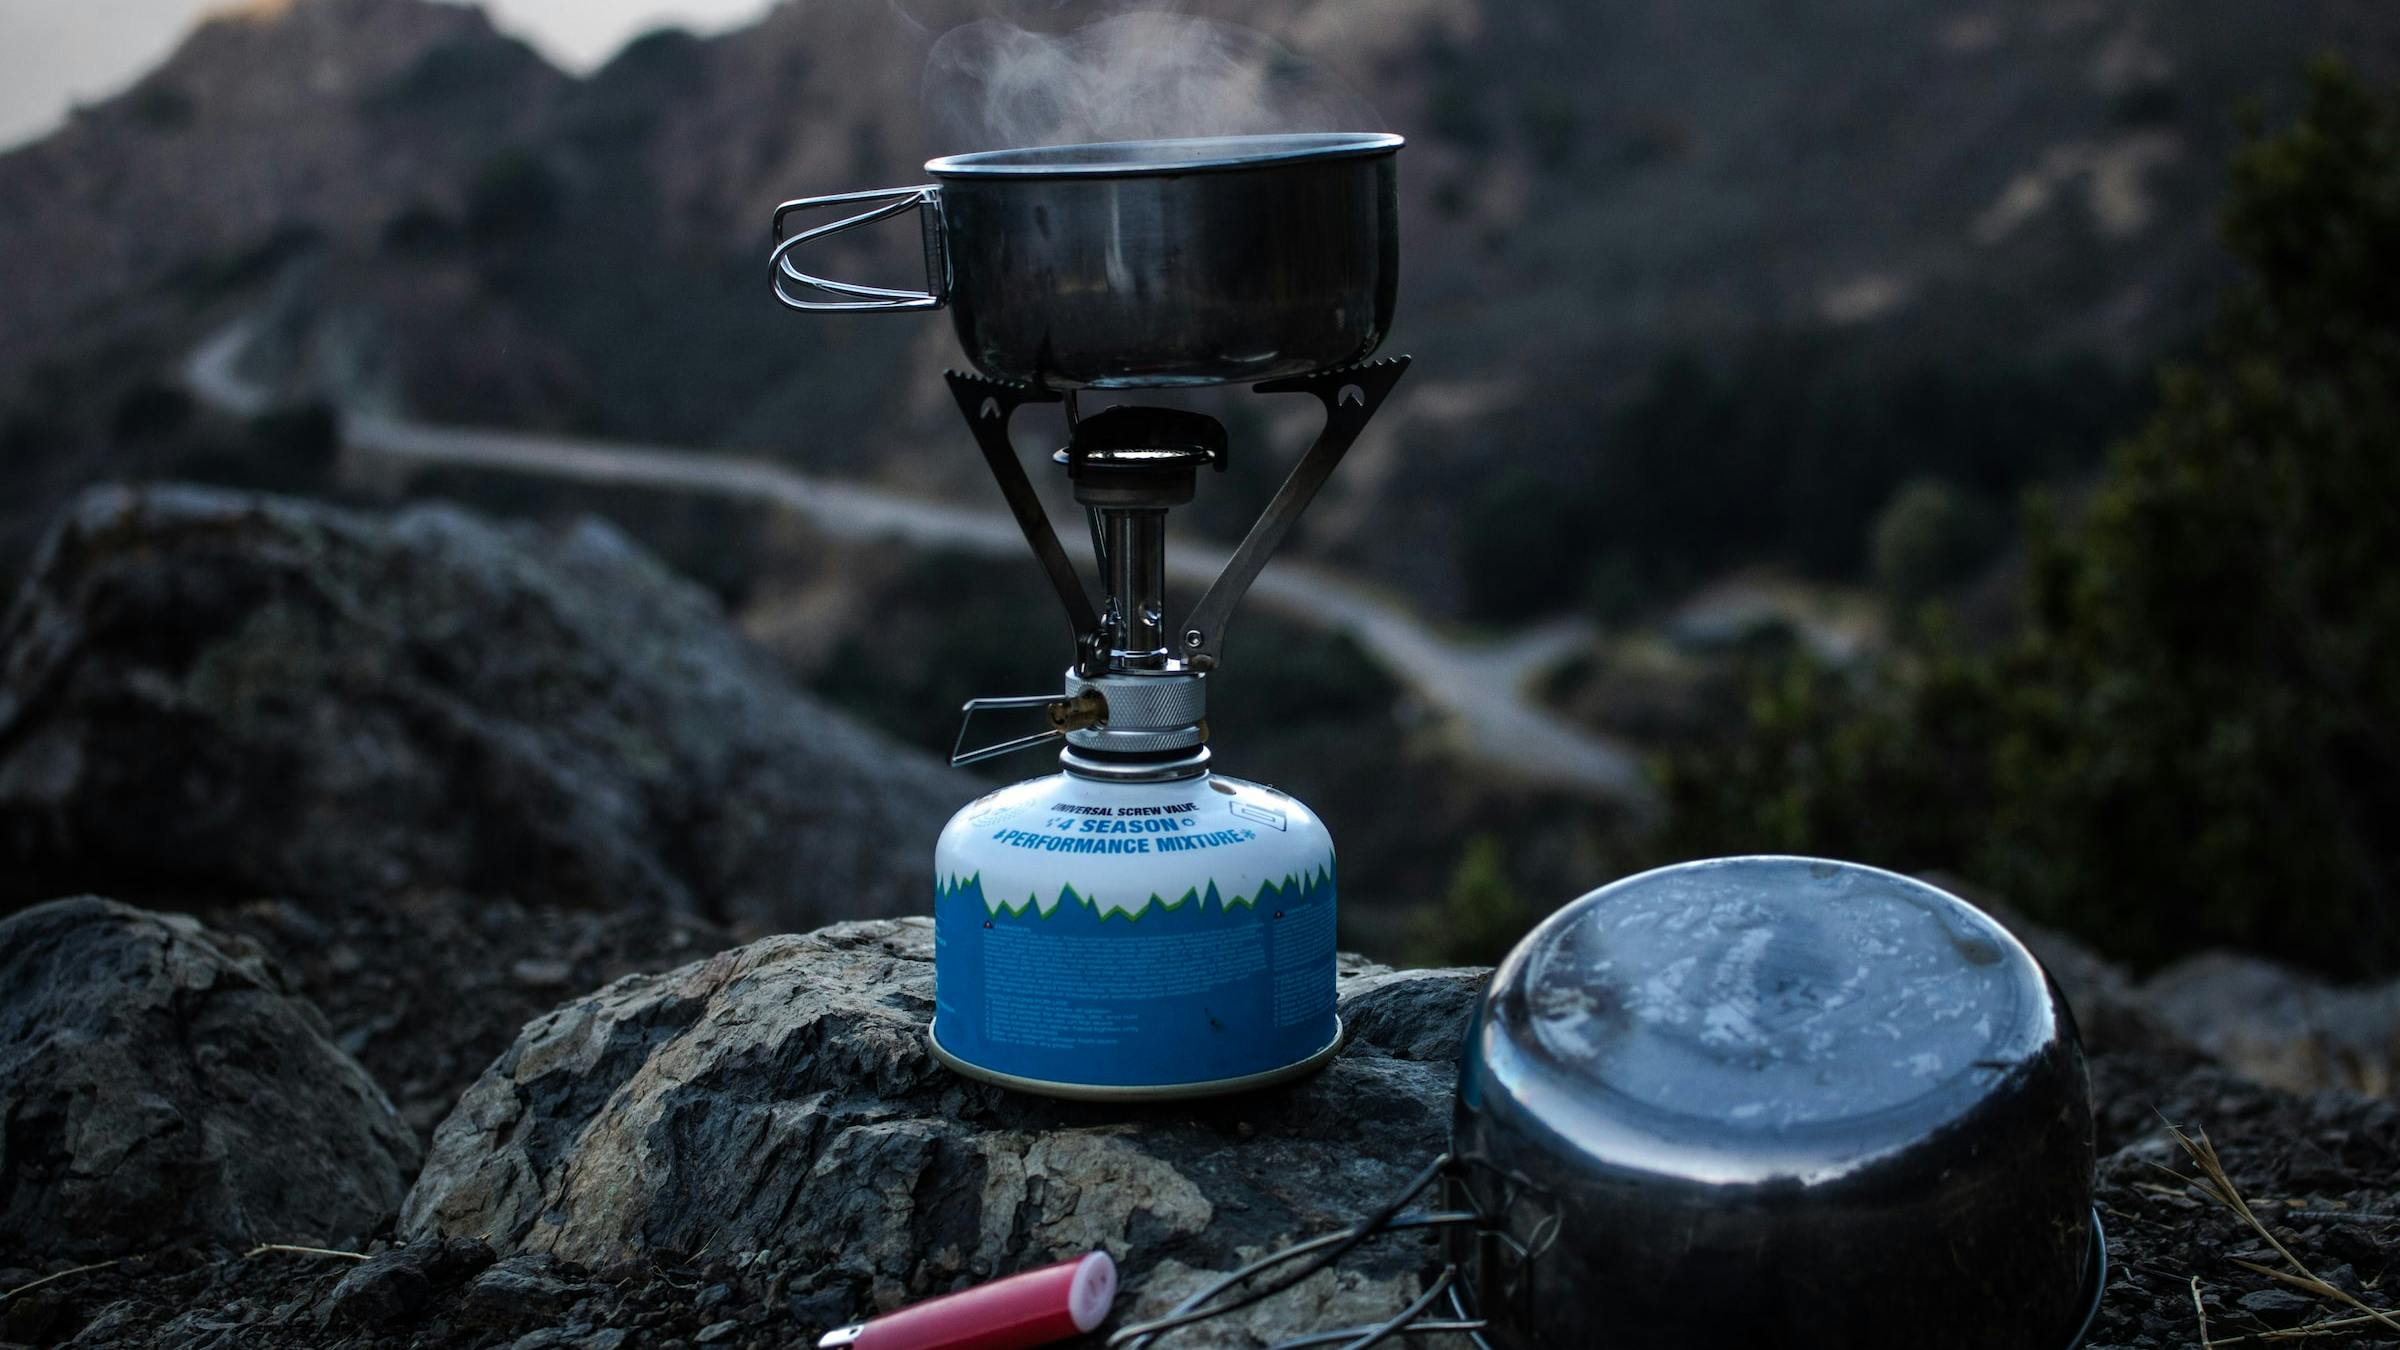 A canister stove being used to boil water in mountainous terrain.